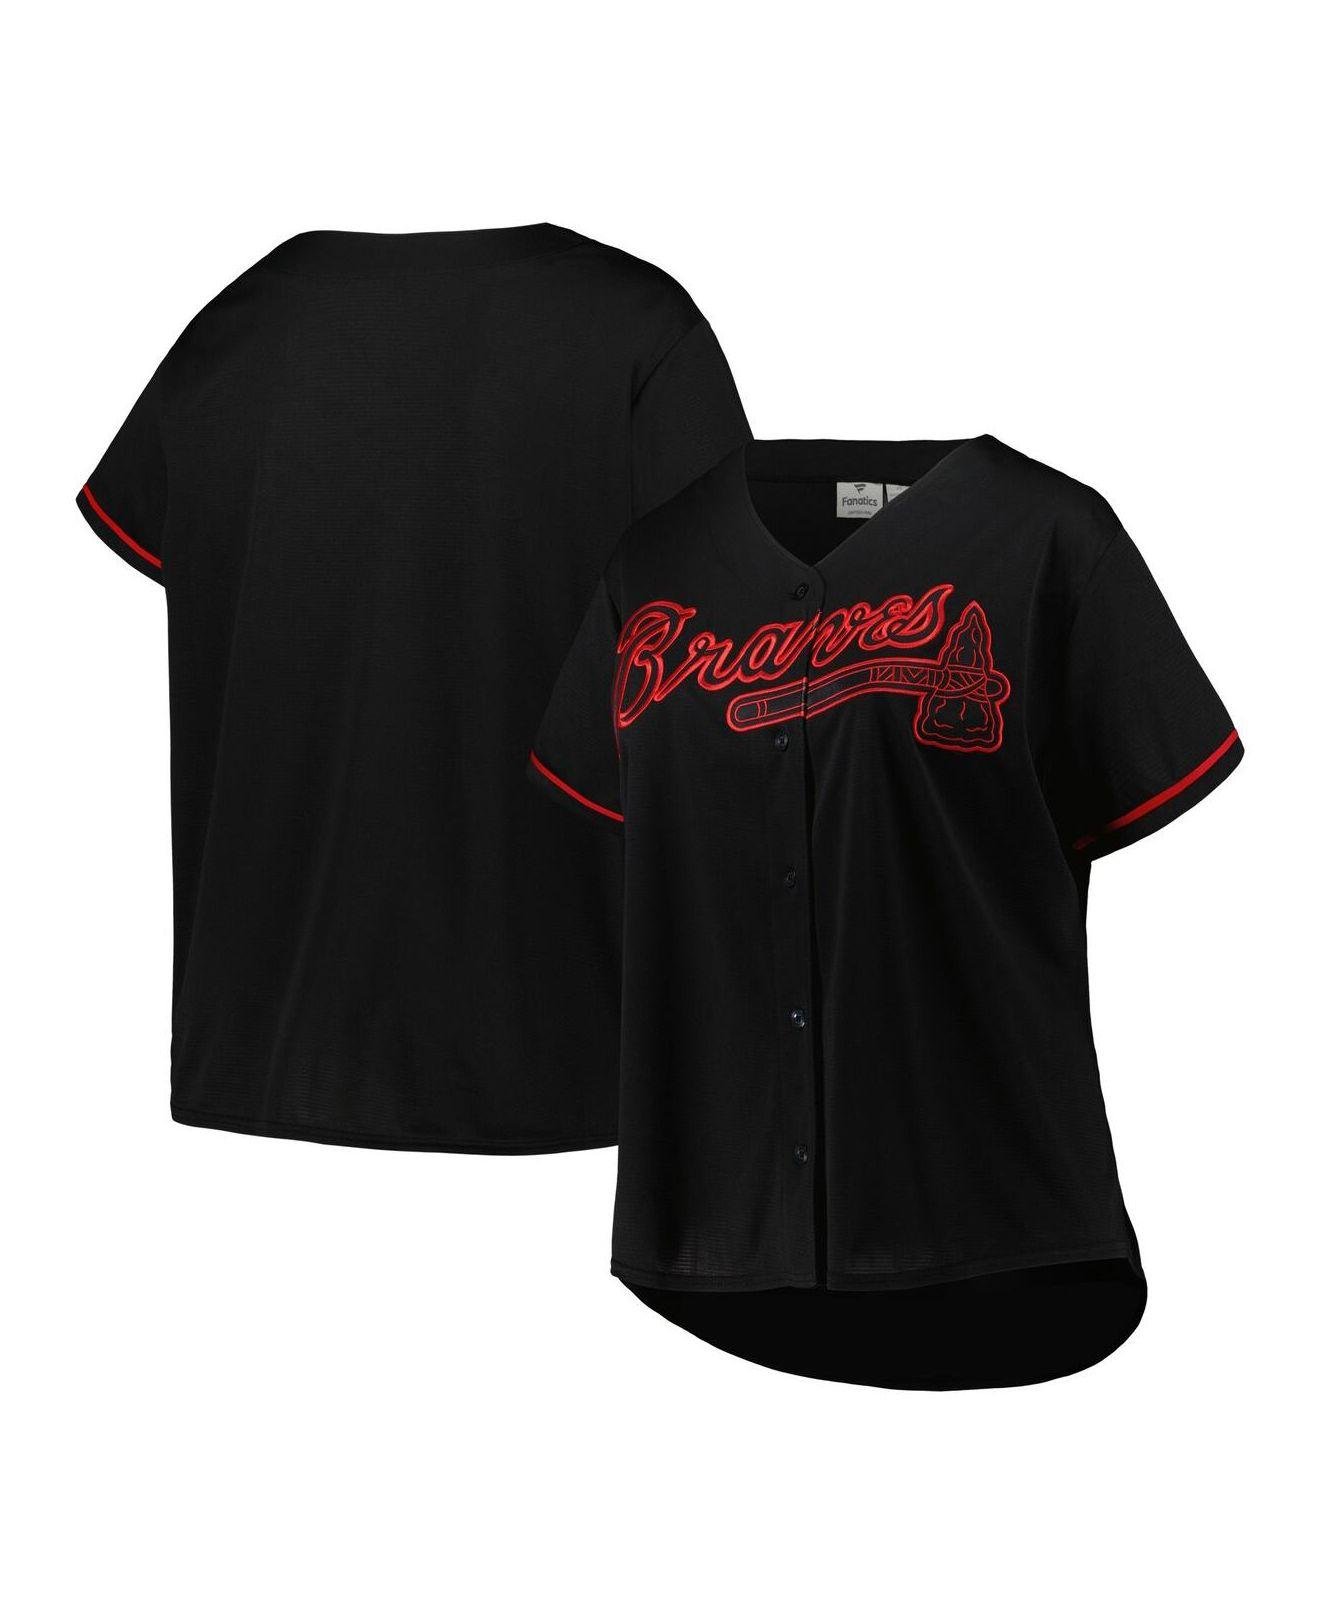 all red braves jersey